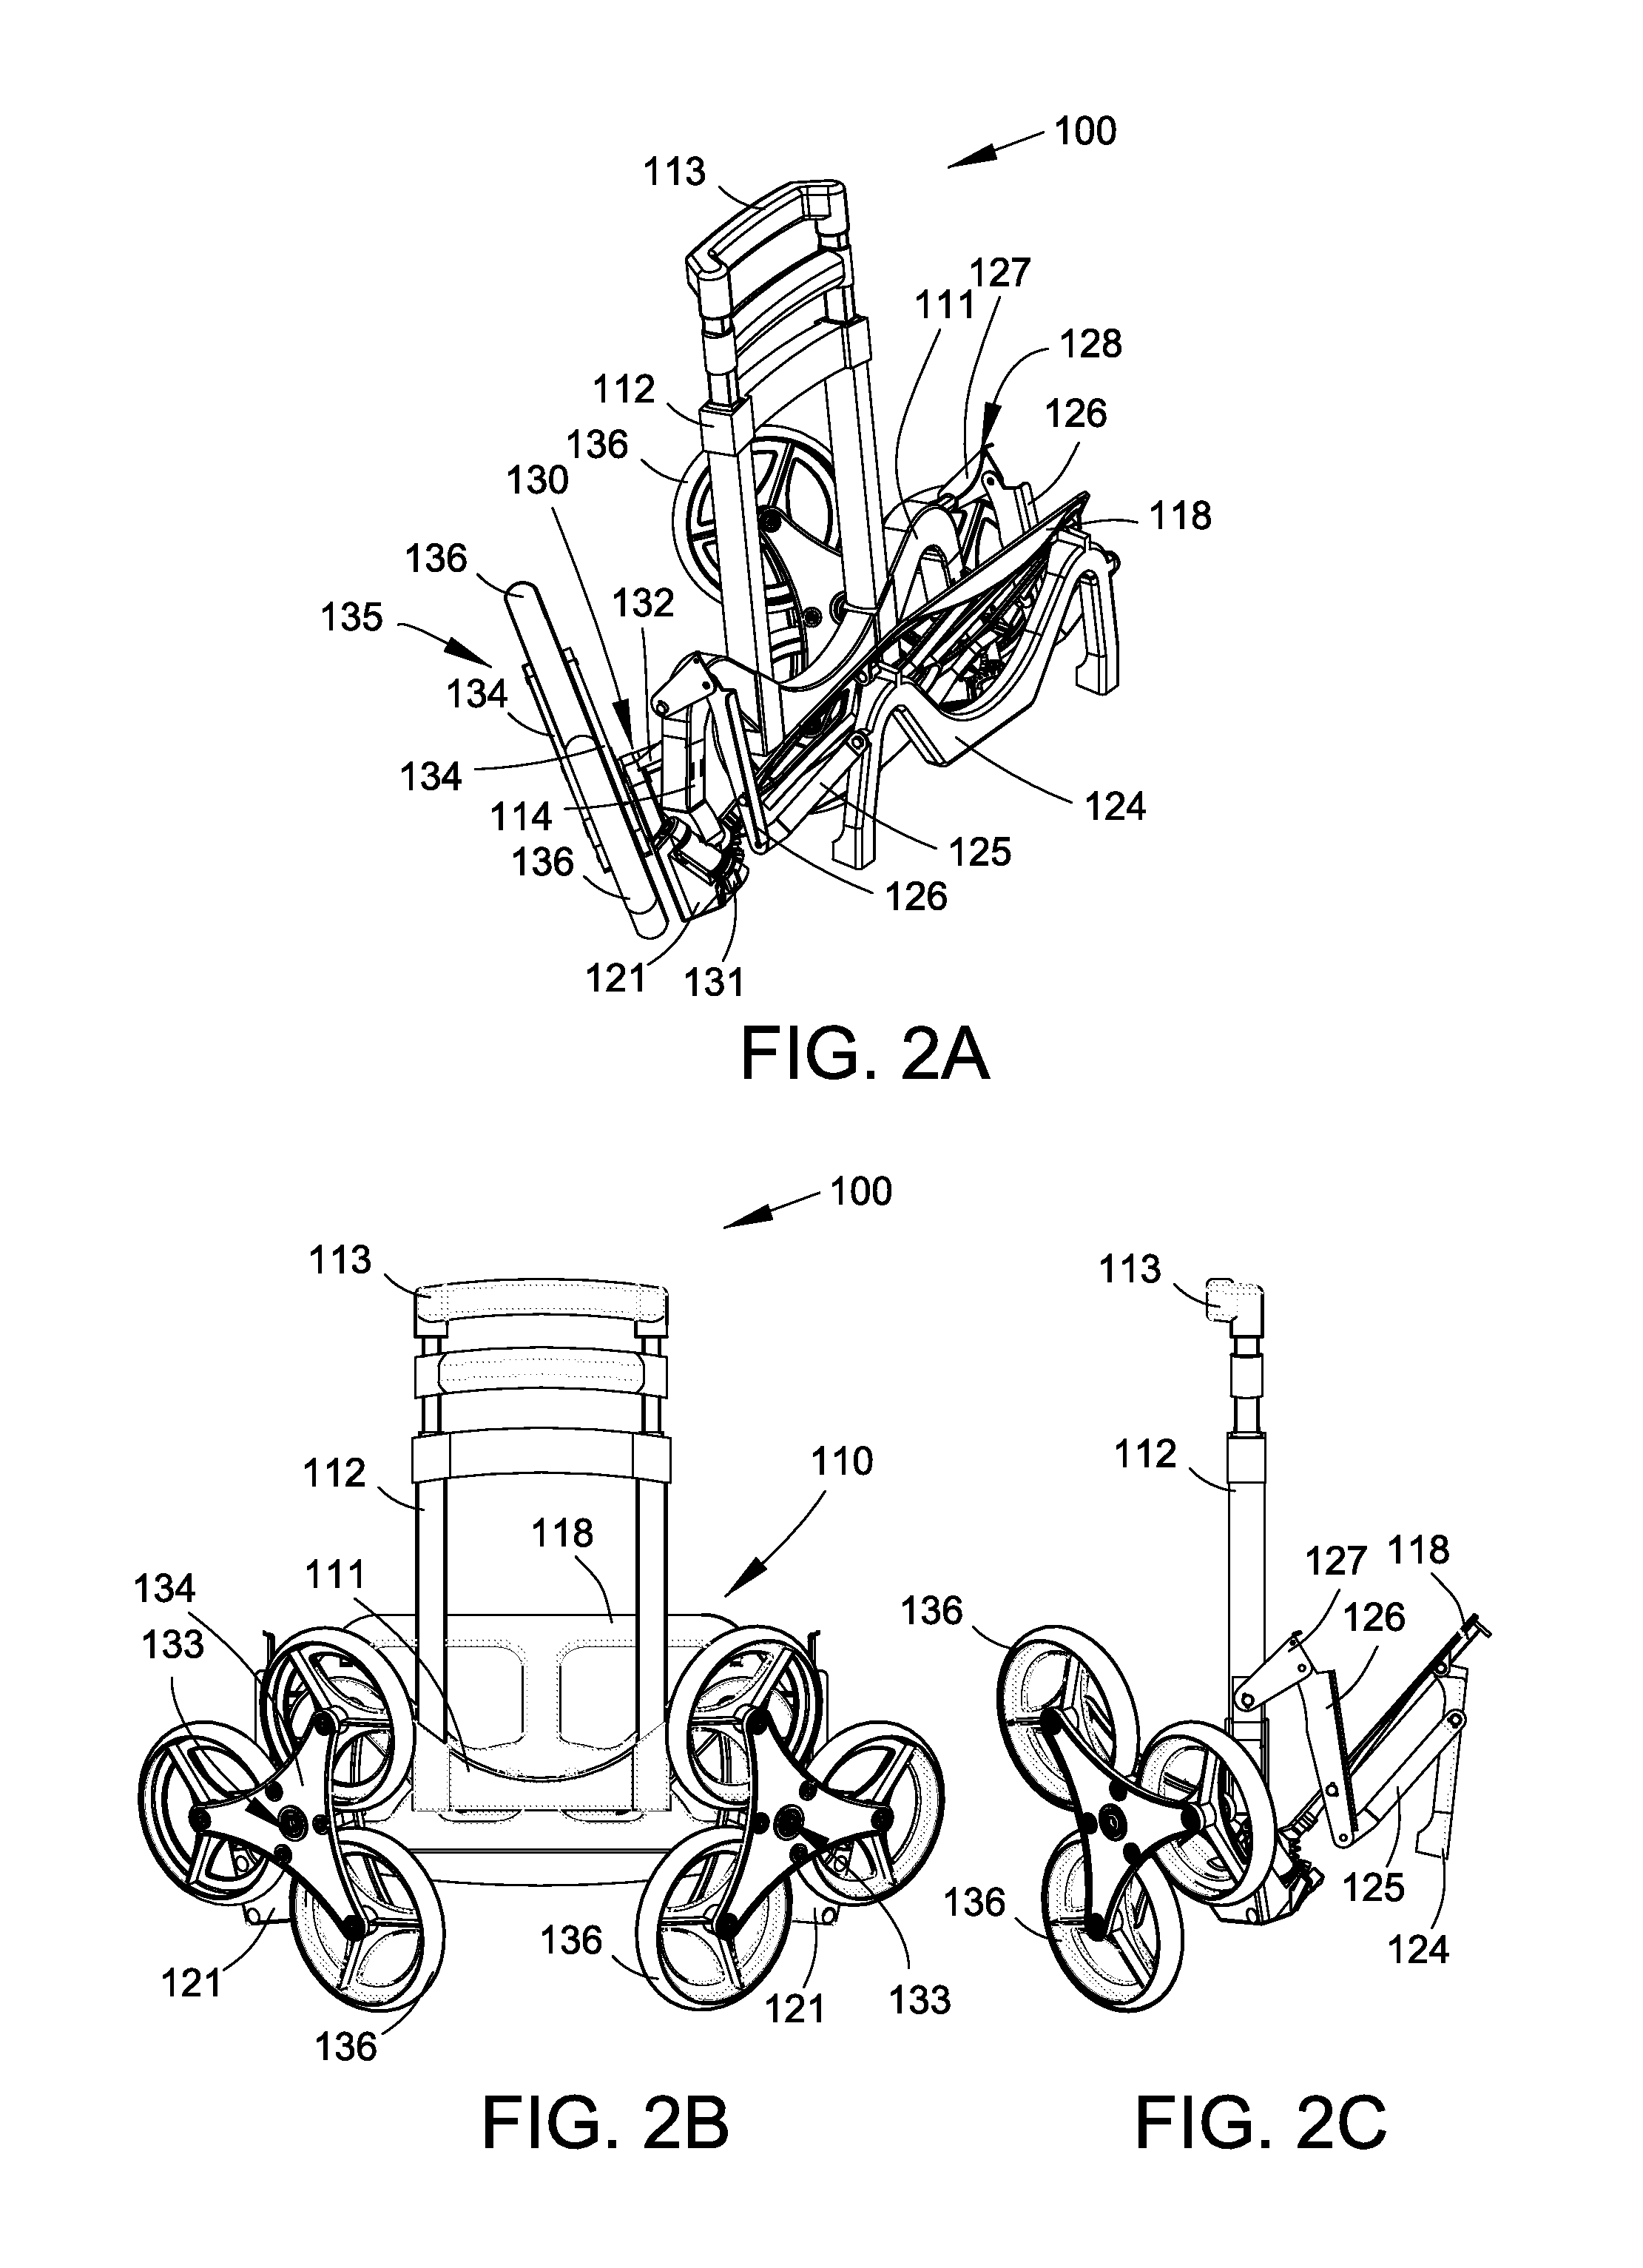 Folding chassis for manually driven carrier vehicles capable of traversing obstacles